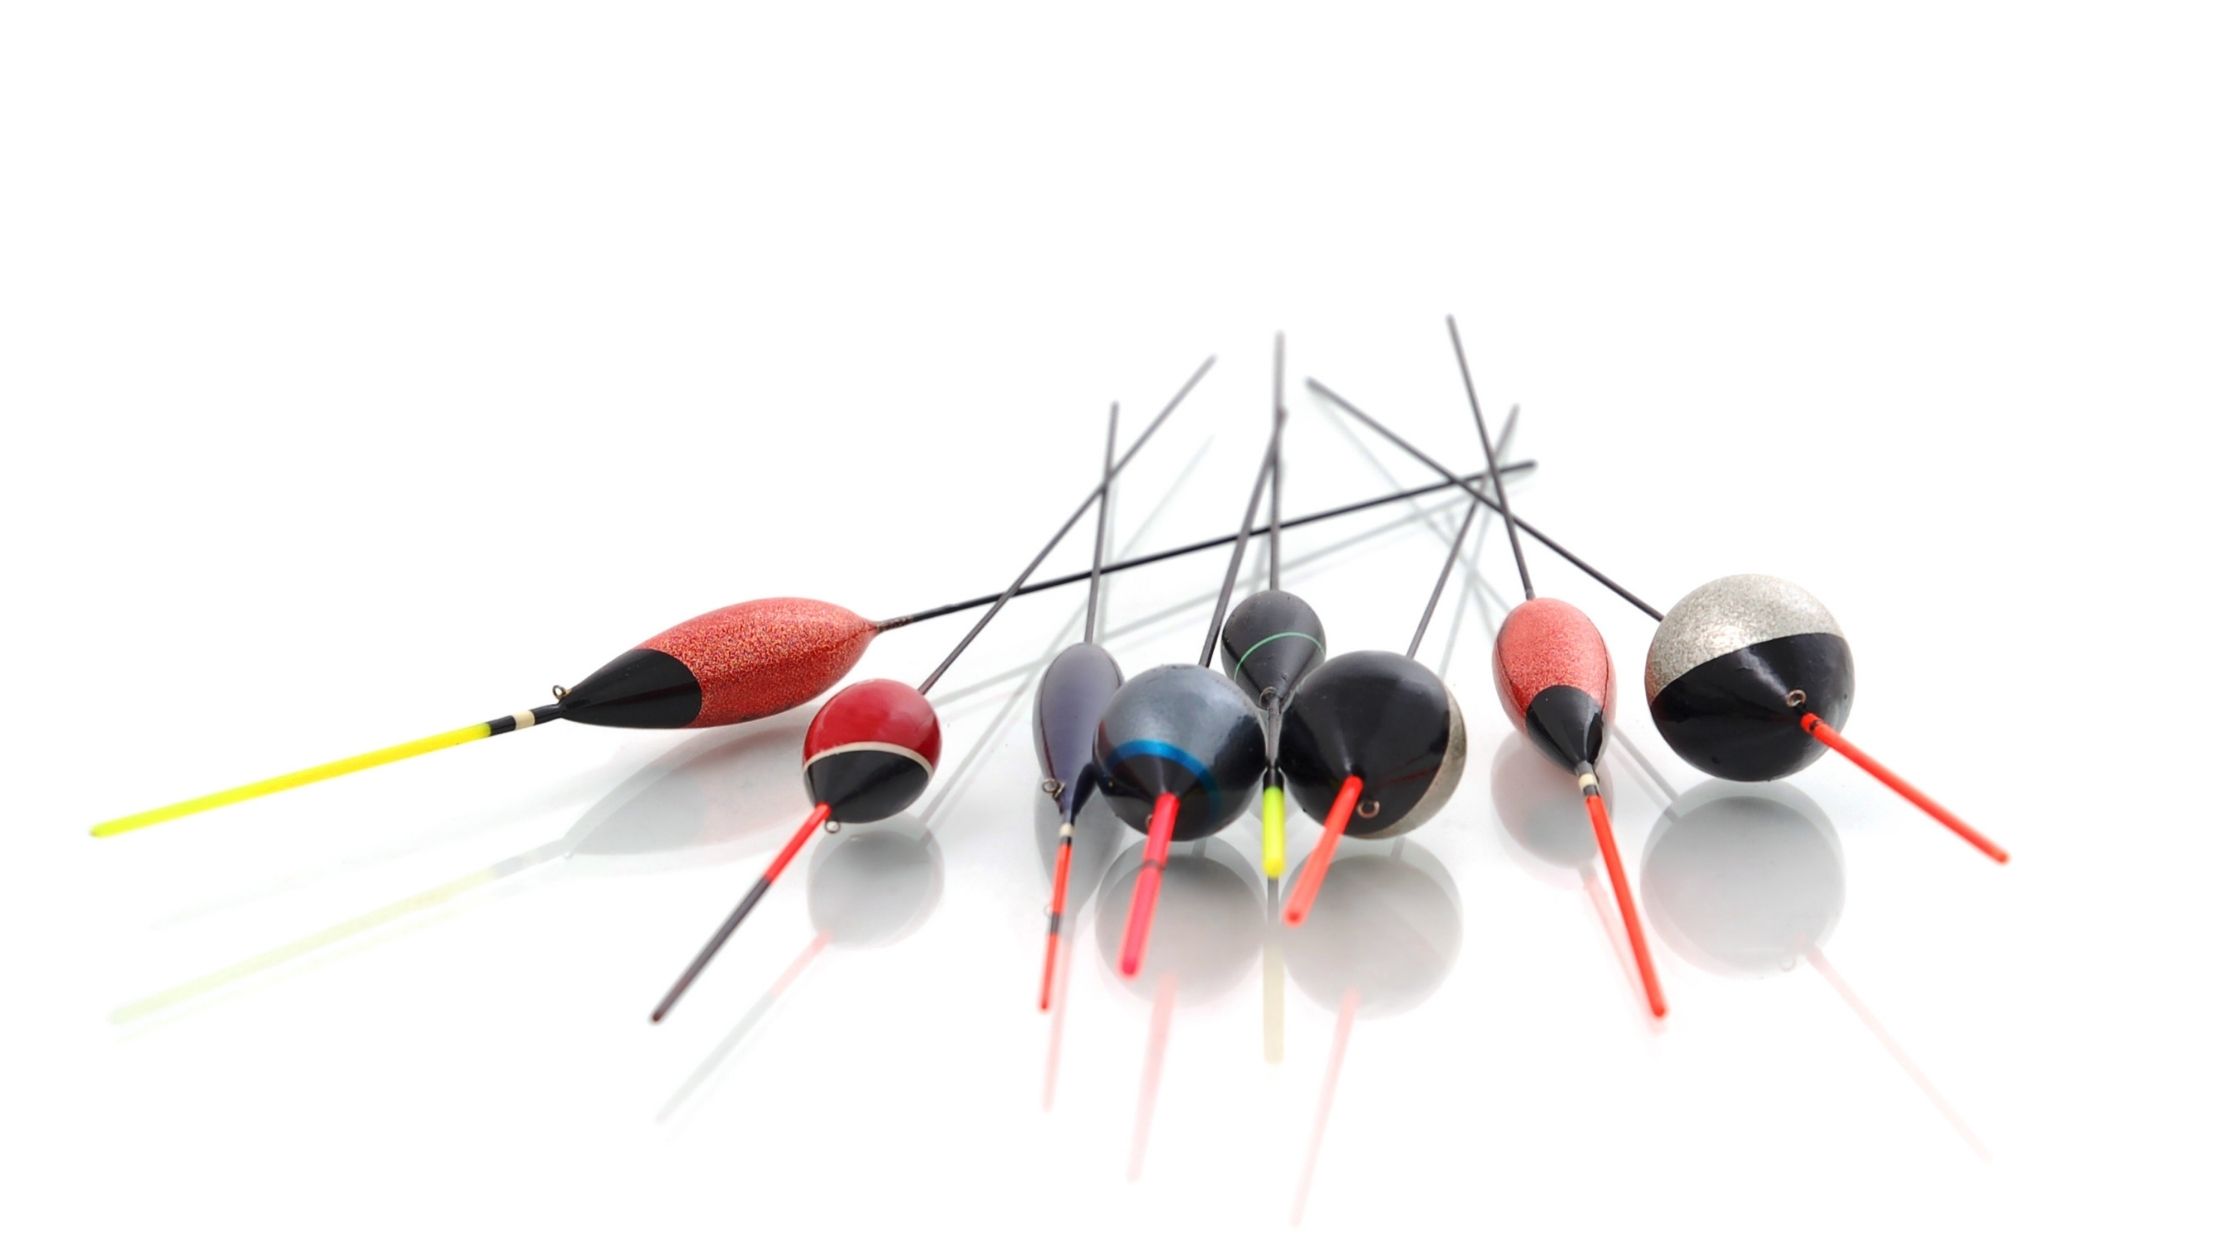 Types of Fishing Floats: The waggler float